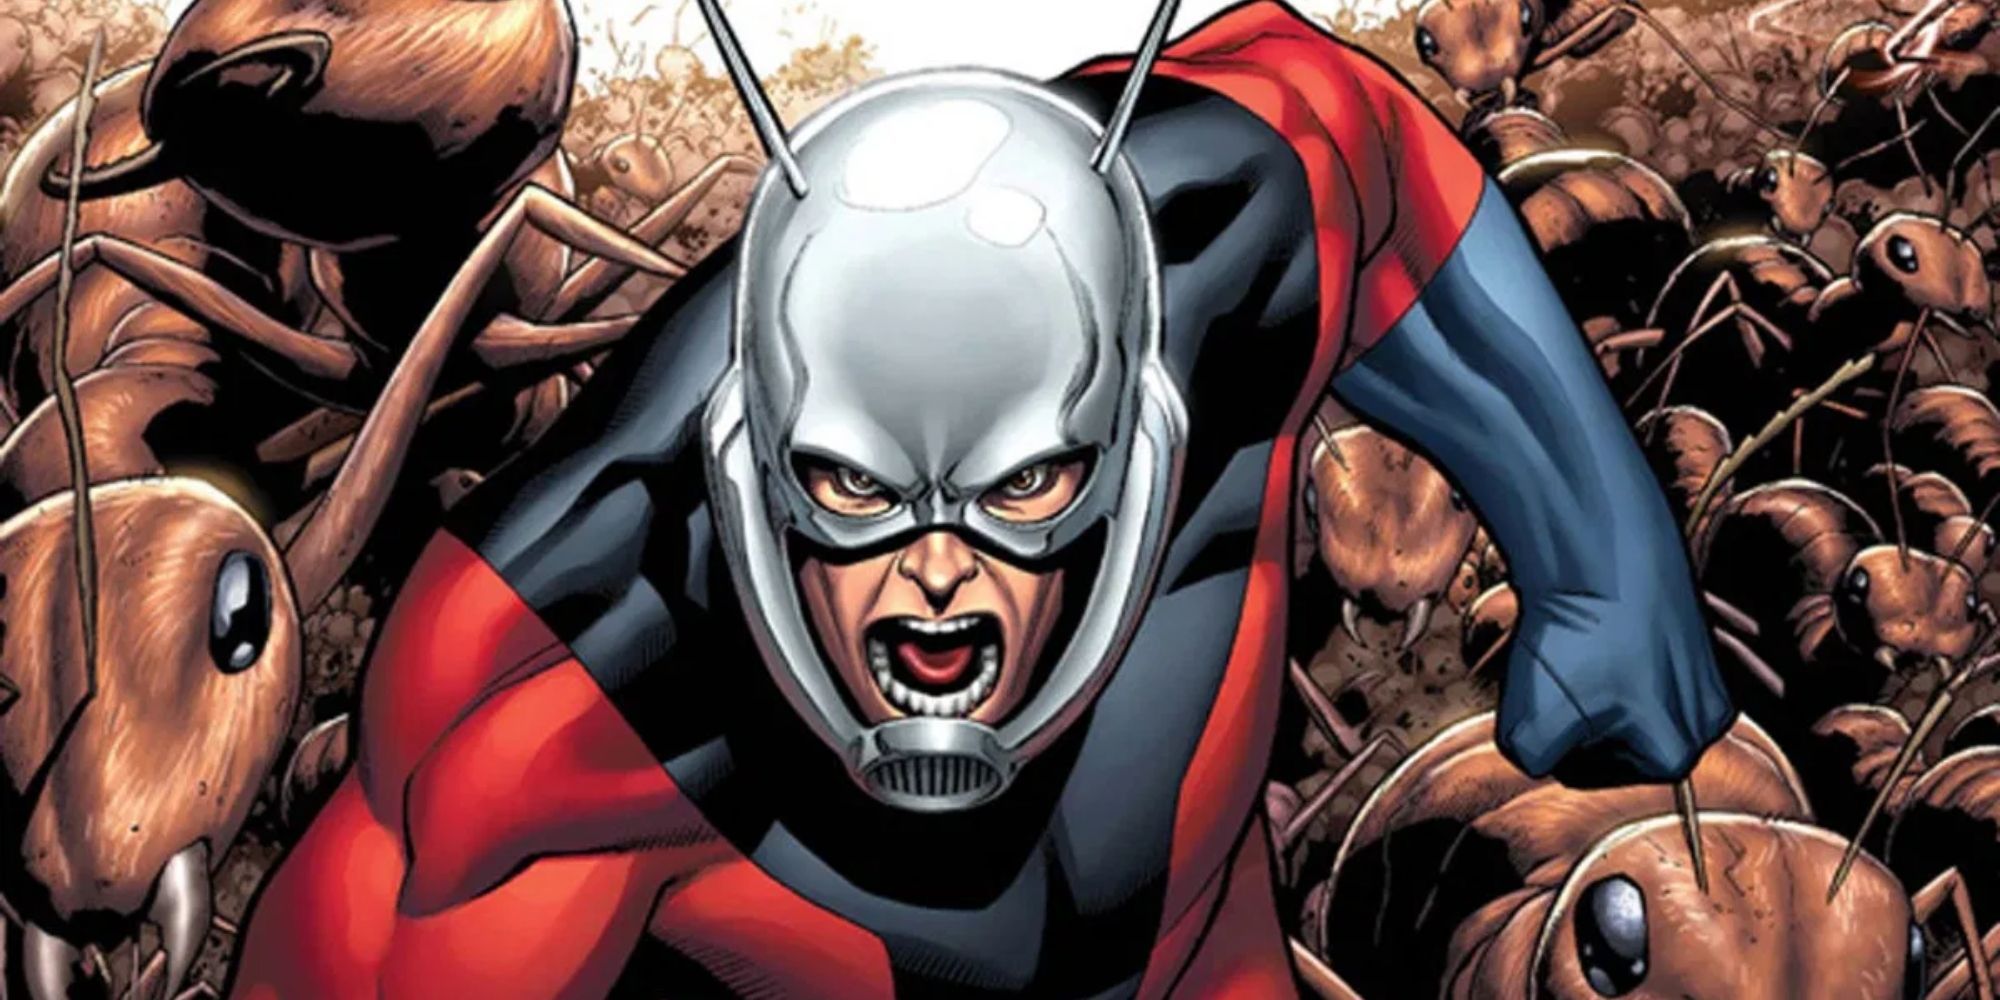 Ant-Man (Hank Pym) - Superheroes That Have Seriously Low Self Confidence